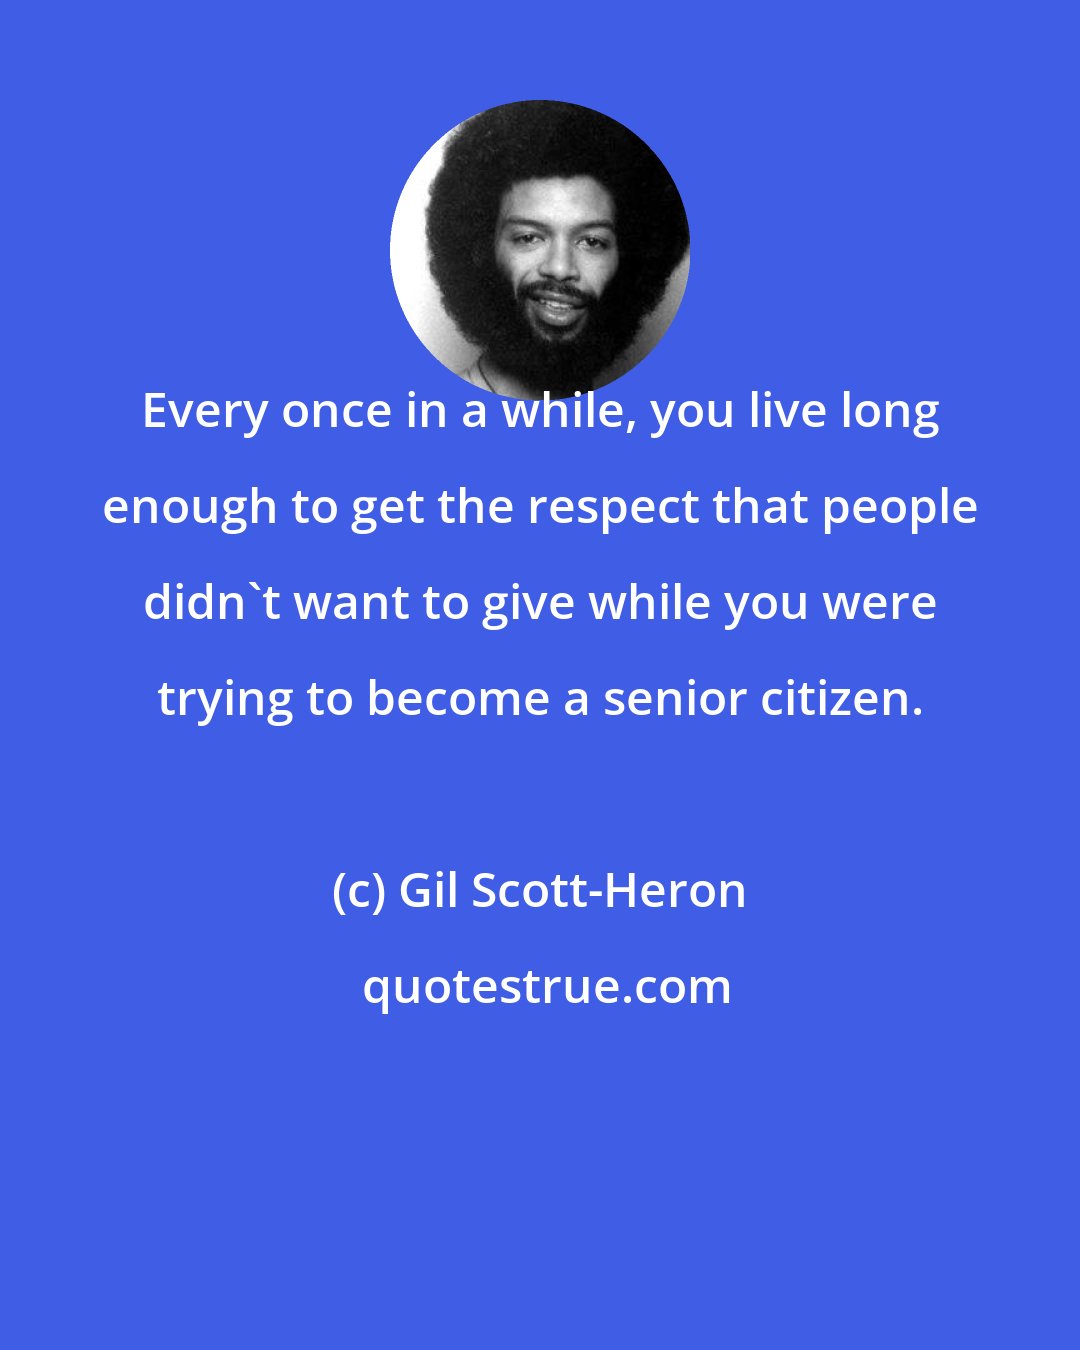 Gil Scott-Heron: Every once in a while, you live long enough to get the respect that people didn't want to give while you were trying to become a senior citizen.